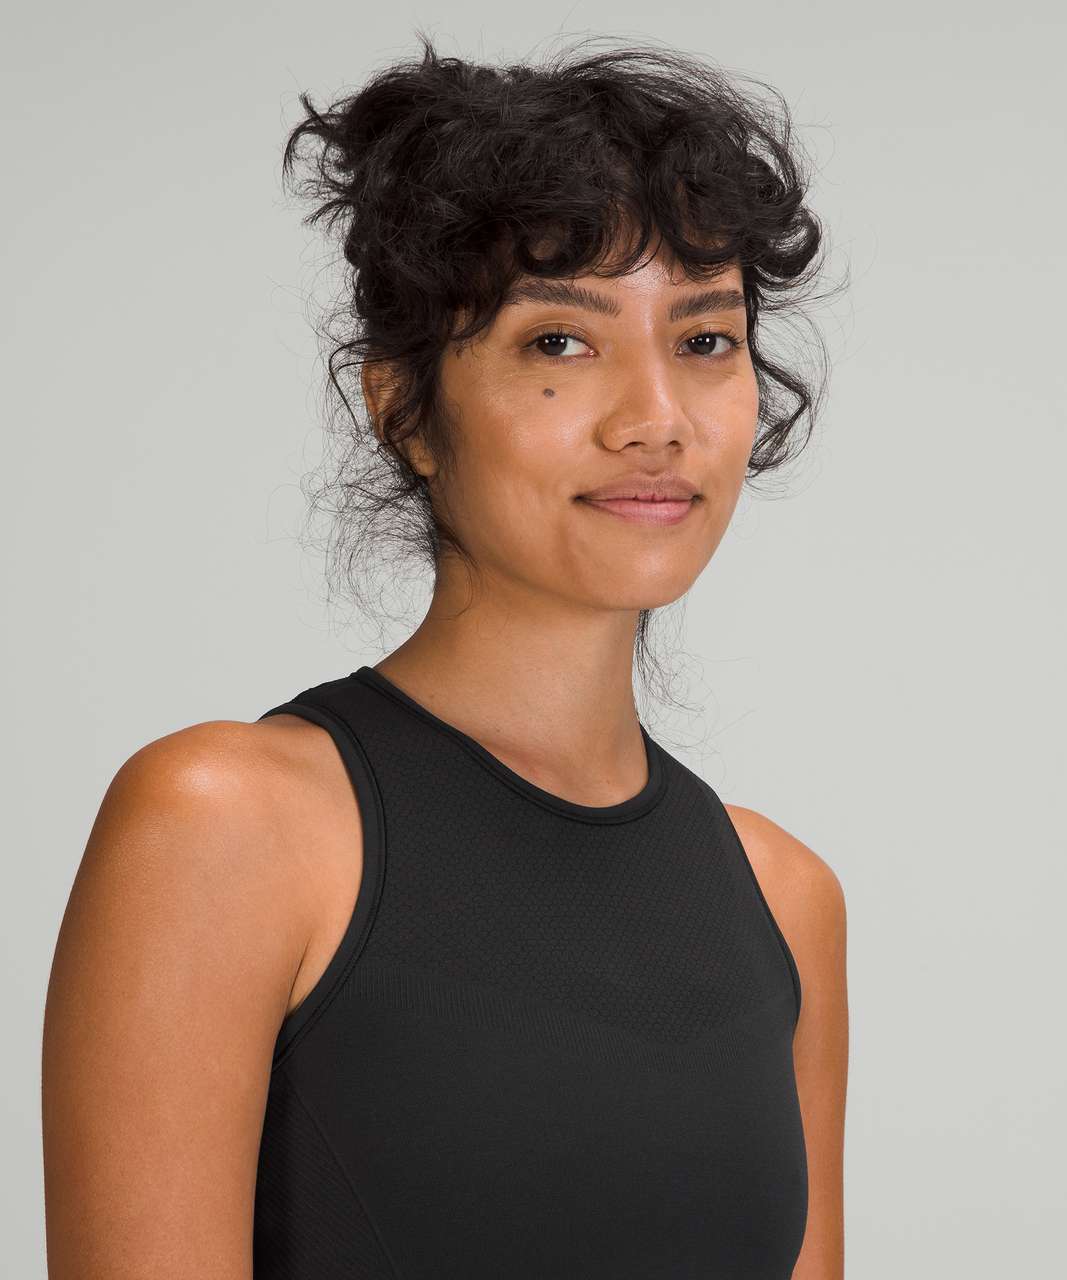 Lululemon For the Chill of It Crop Tank - Black